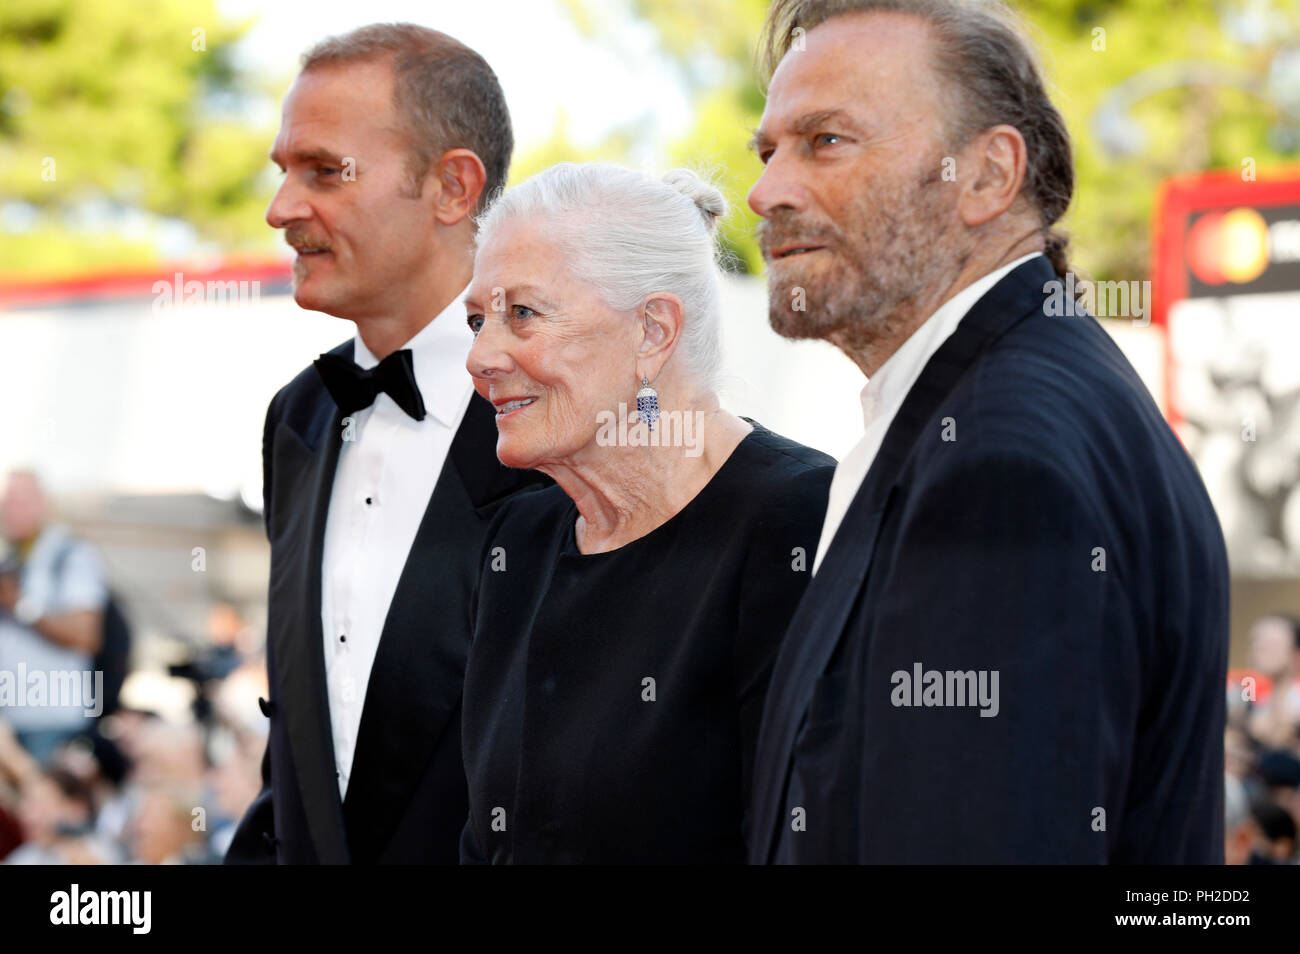 Venice, Italy. 29th Aug 2018. Carlo Gabriel Nero, Vanessa Redgrave and Franco Nero attending the 'First Man' premiere at the 75th Venice International Film Festival at the Palazzo del Cinema on August 29, 2018 in Venice, Italy Credit: Geisler-Fotopress GmbH/Alamy Live News Stock Photo